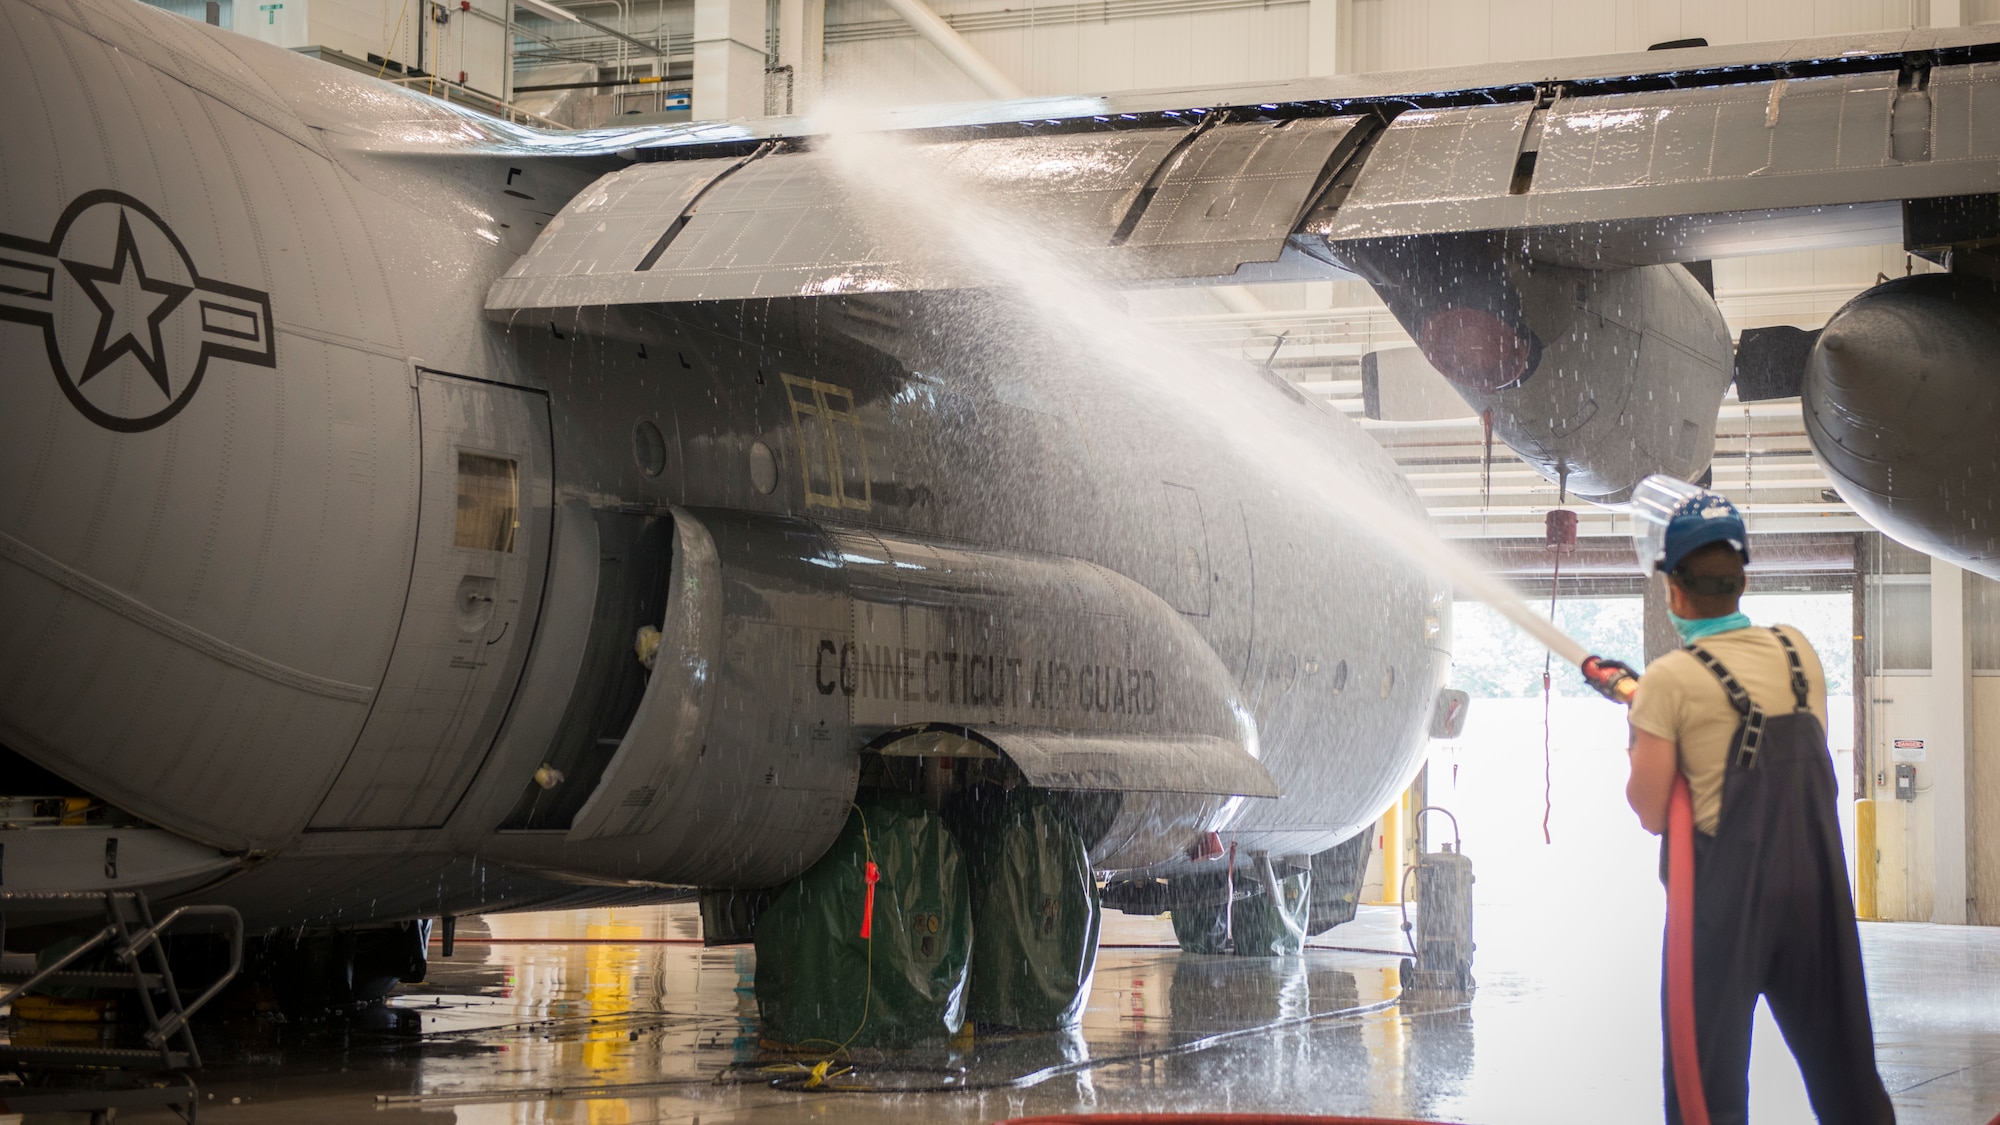 Airman 1st Class A.J. Raffles, 103rd Maintenance Squadron structural maintenance specialist, washes a C-130H Hercules at the Bradley Air National Guard Base fuel cell and corrosion control facility in East Granby, Connecticut, July 13, 2020. Each of the 103rd Airlift Wing’s eight C-130 aircraft are washed every six months to clean contaminants and prevent corrosion, ensuring aircraft readiness and extending its life cycle. (U.S. Air National Guard photo by Staff Sgt. Steven Tucker)